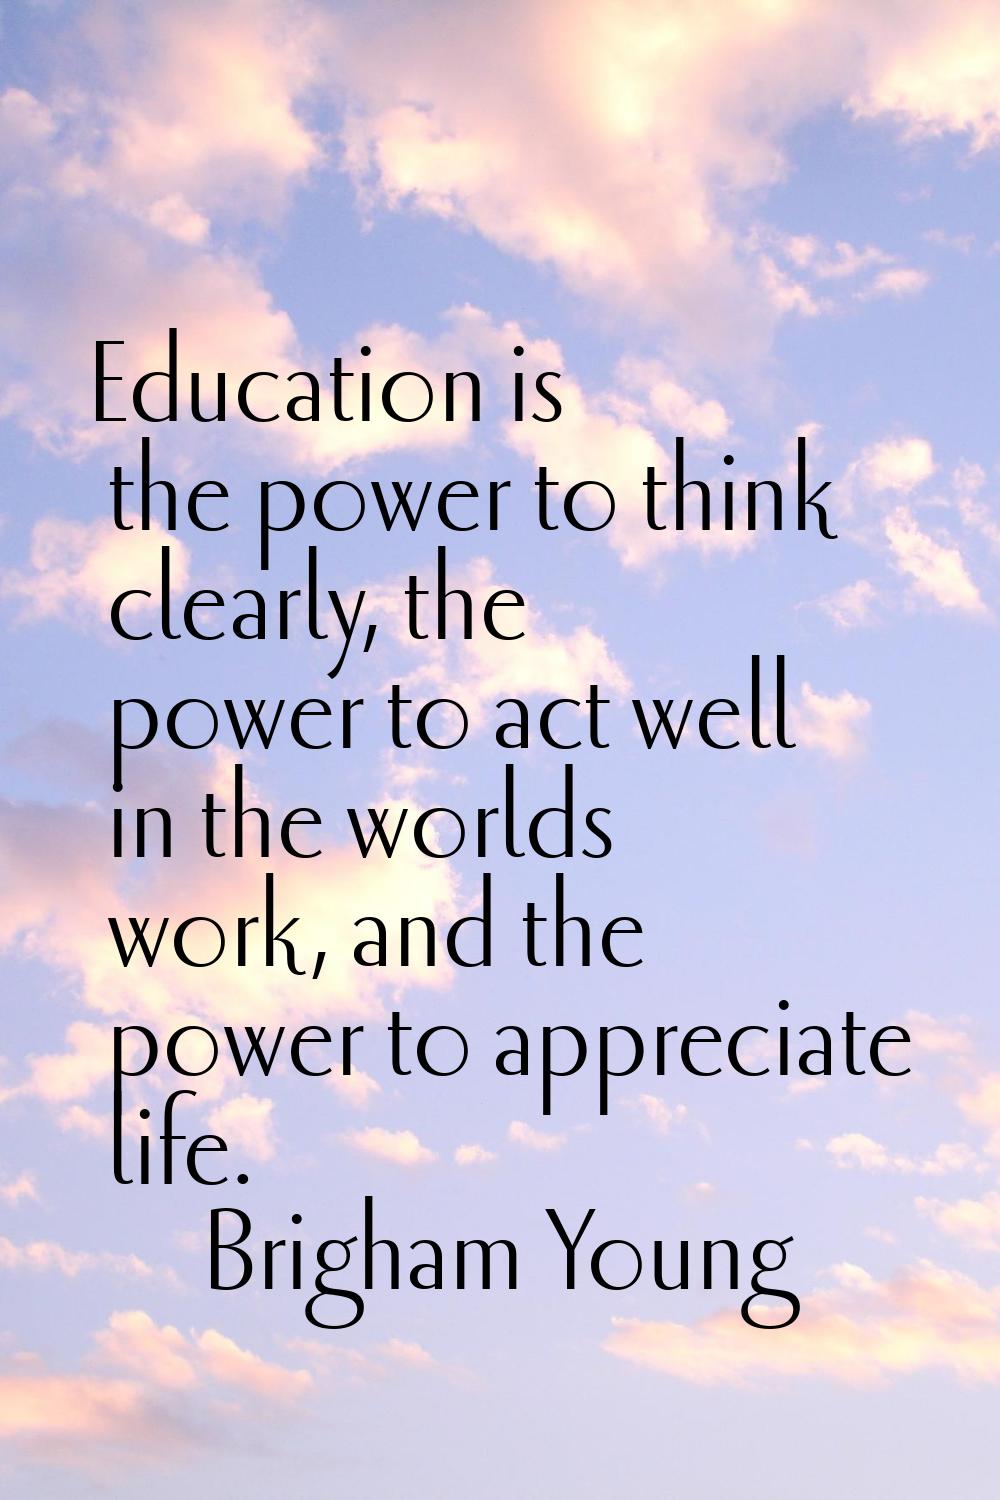 Education is the power to think clearly, the power to act well in the worlds work, and the power to